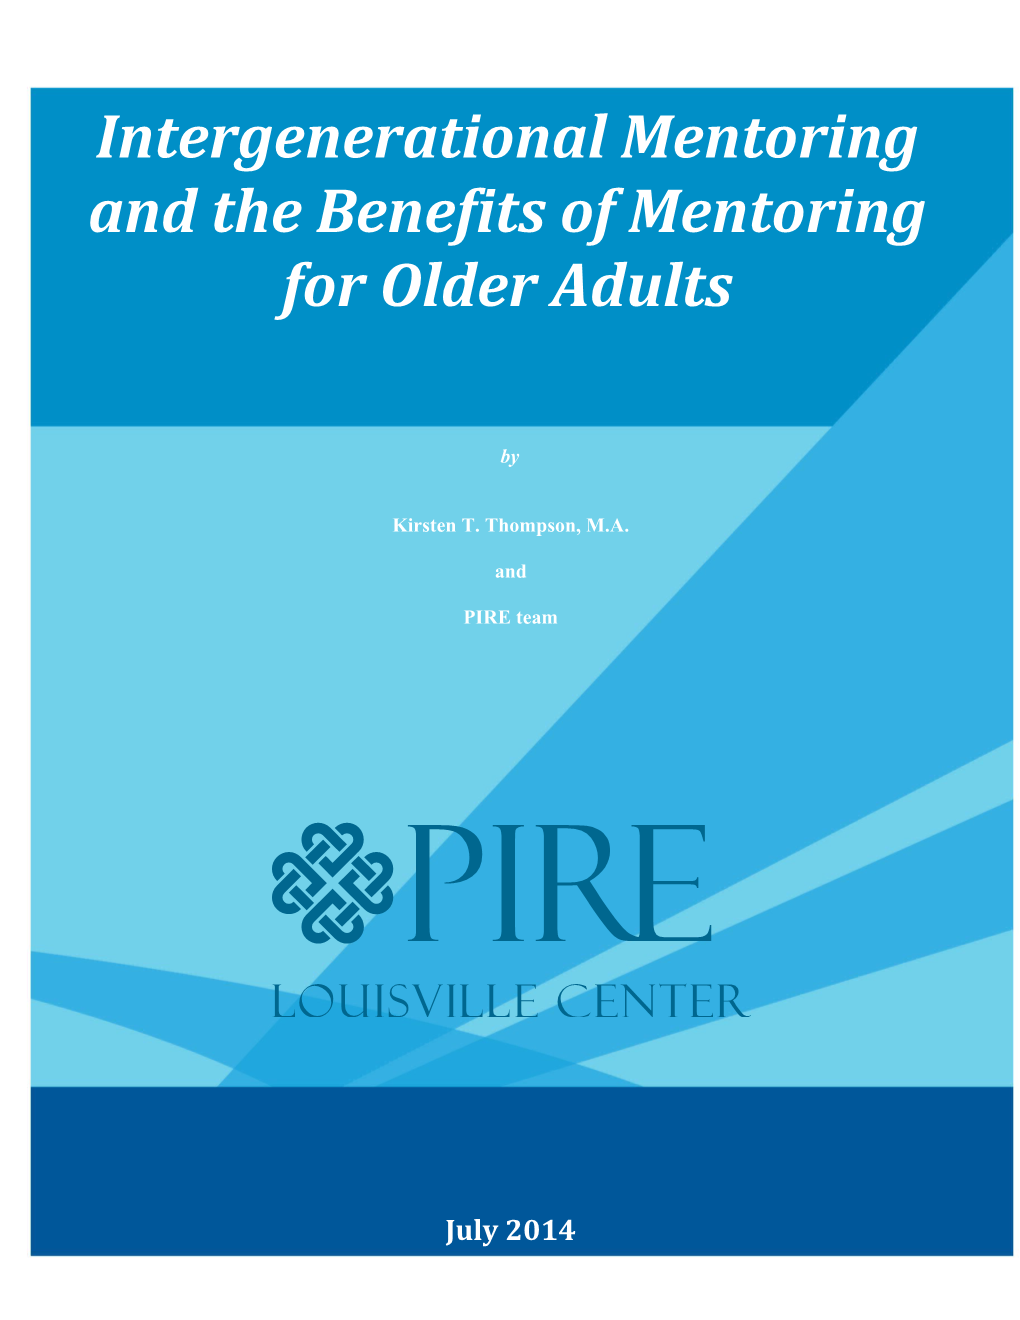 Intergenerational Mentoring and the Benefits of Mentoring for Older Adults